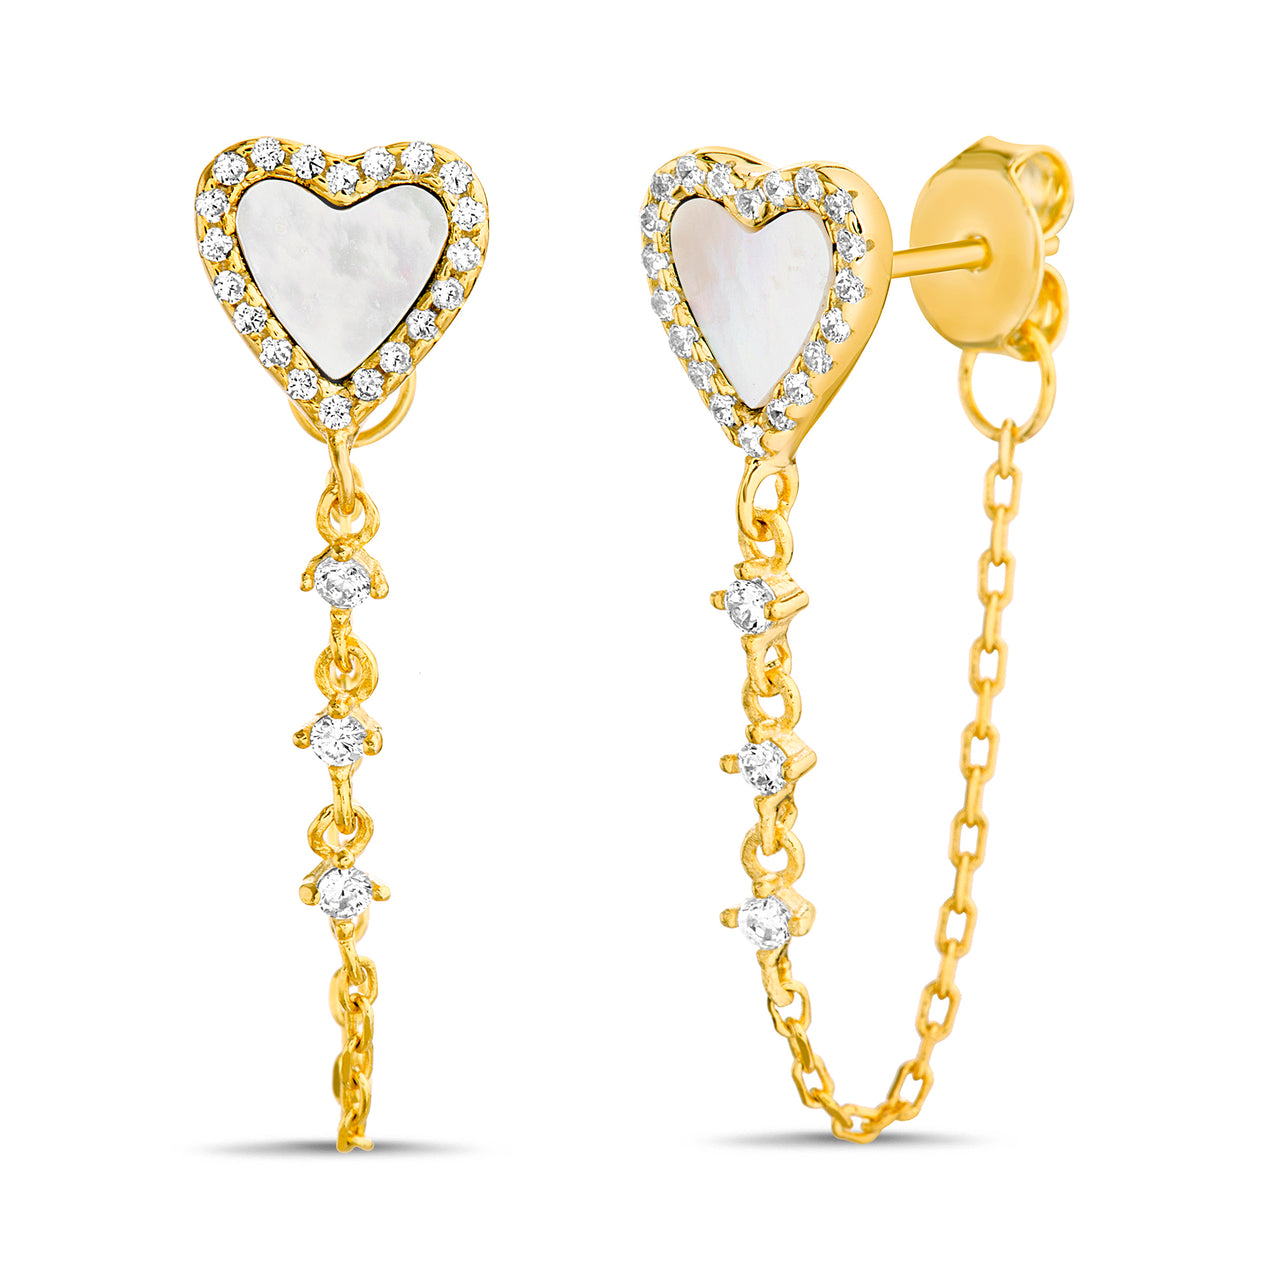 Lesa Michele Enamel Cubic Zirconia White Heart Chain Front to Back Earrings in Yellow Gold Plated Sterling Silver